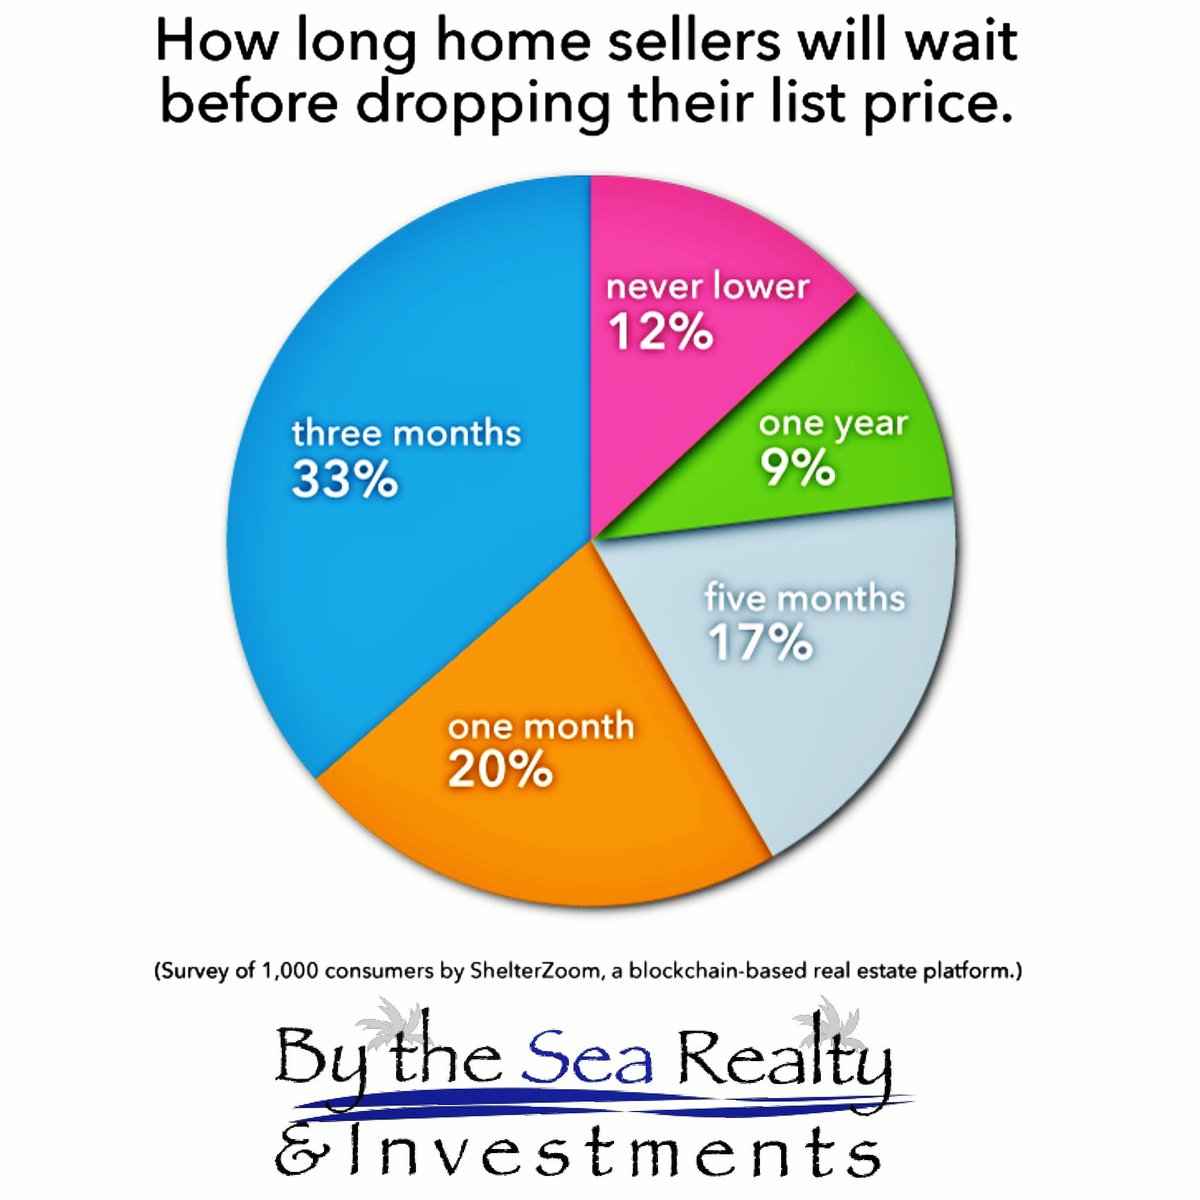 A lingering #listing with no takers, how long does it take for the #home #seller to accept that a #pricereduction is needed? #realestate #realtor #sell #homesellingtips #puntagordarealestate #deepcreekrealestate #pgi #miamirealestate #southeastflorida #millenials #downpayment